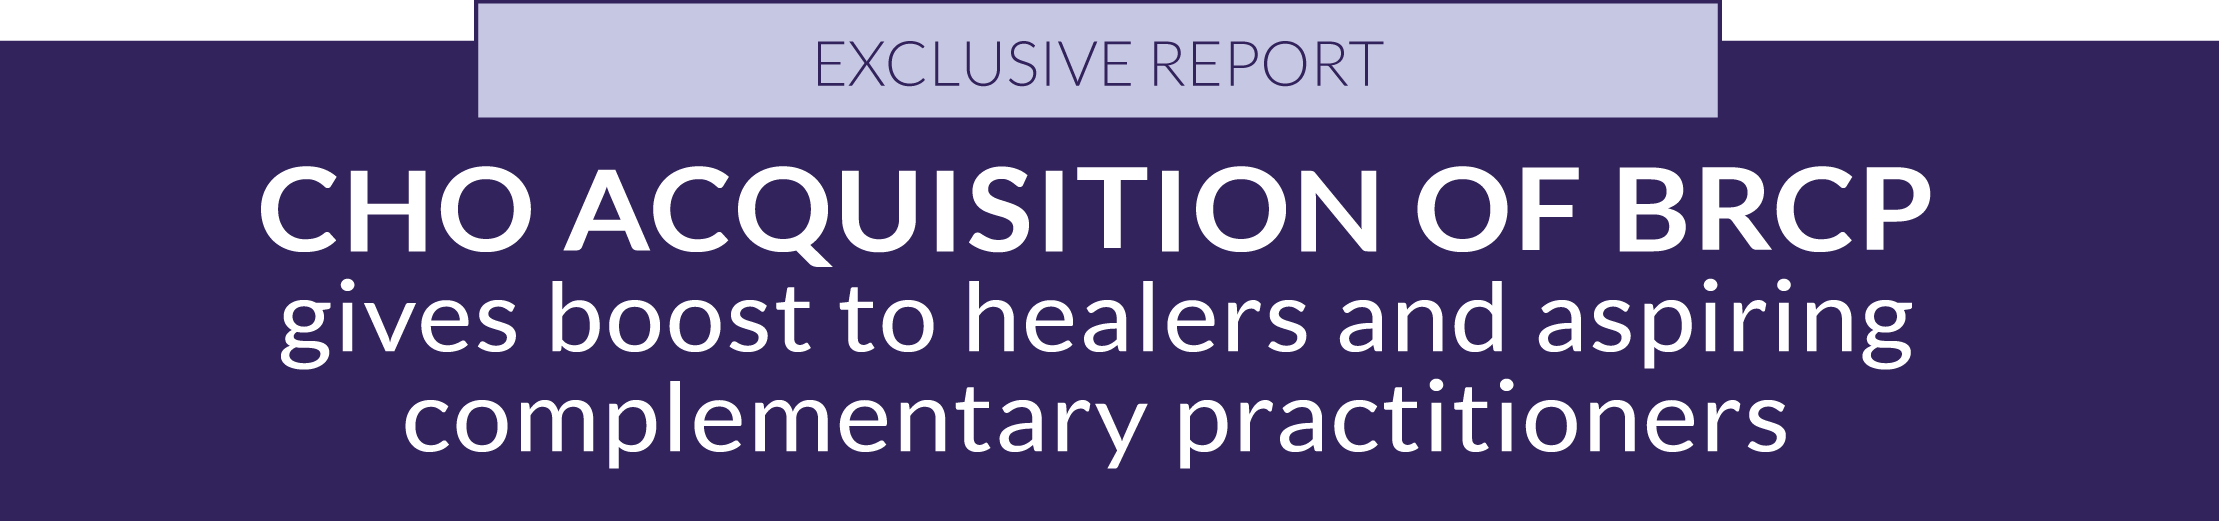 EXCLUSIVE REPORT: CHO acquisition of BRCP gives boost to healers and aspiring complementary practitioners